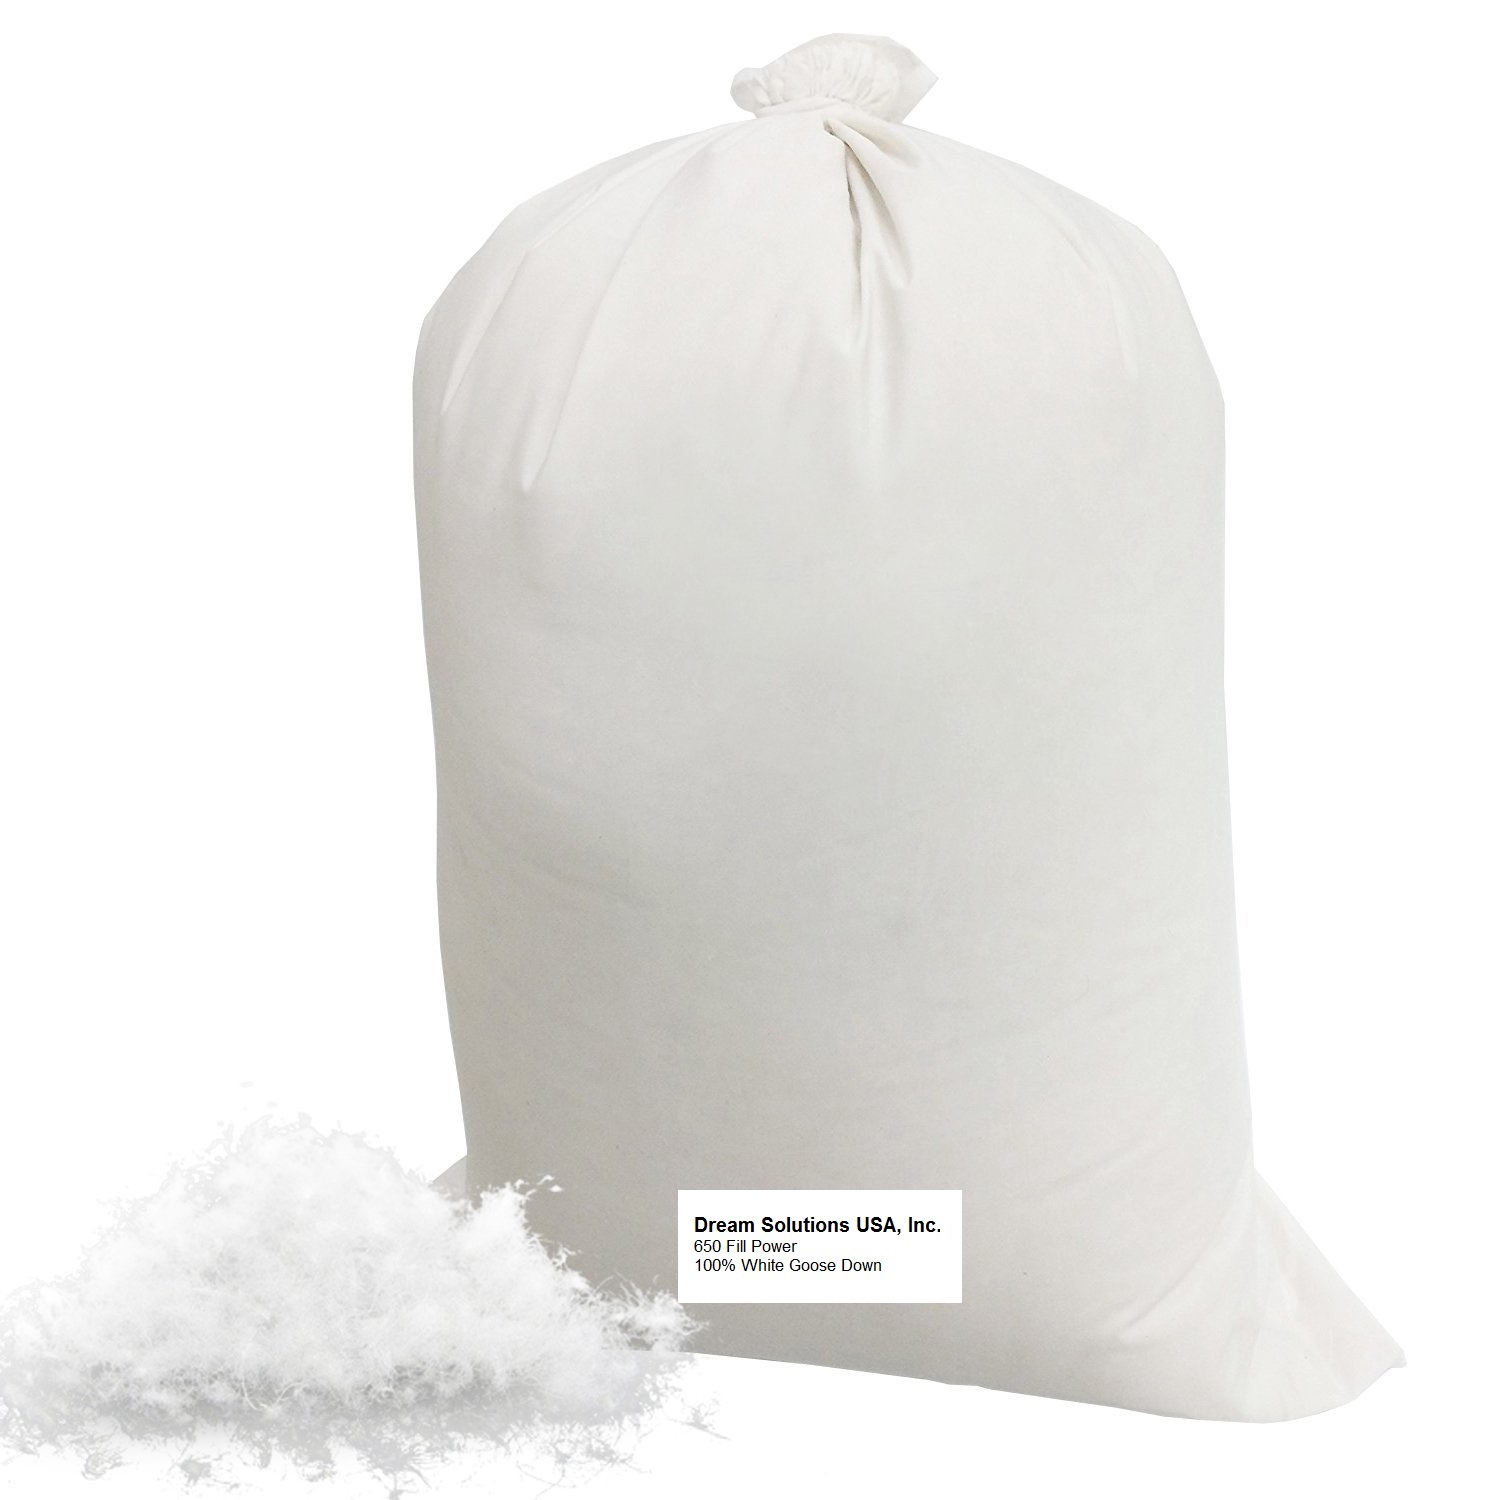 Bulk Goose Down Filling (1/2 lb.) 650 Fill Power – 100% Natural White, No Feathers – Fill Comforters, Pillows, Jackets and More – Ultra-Plush Hungarian Softness - Dream Solutions USA Brand - image 1 of 5